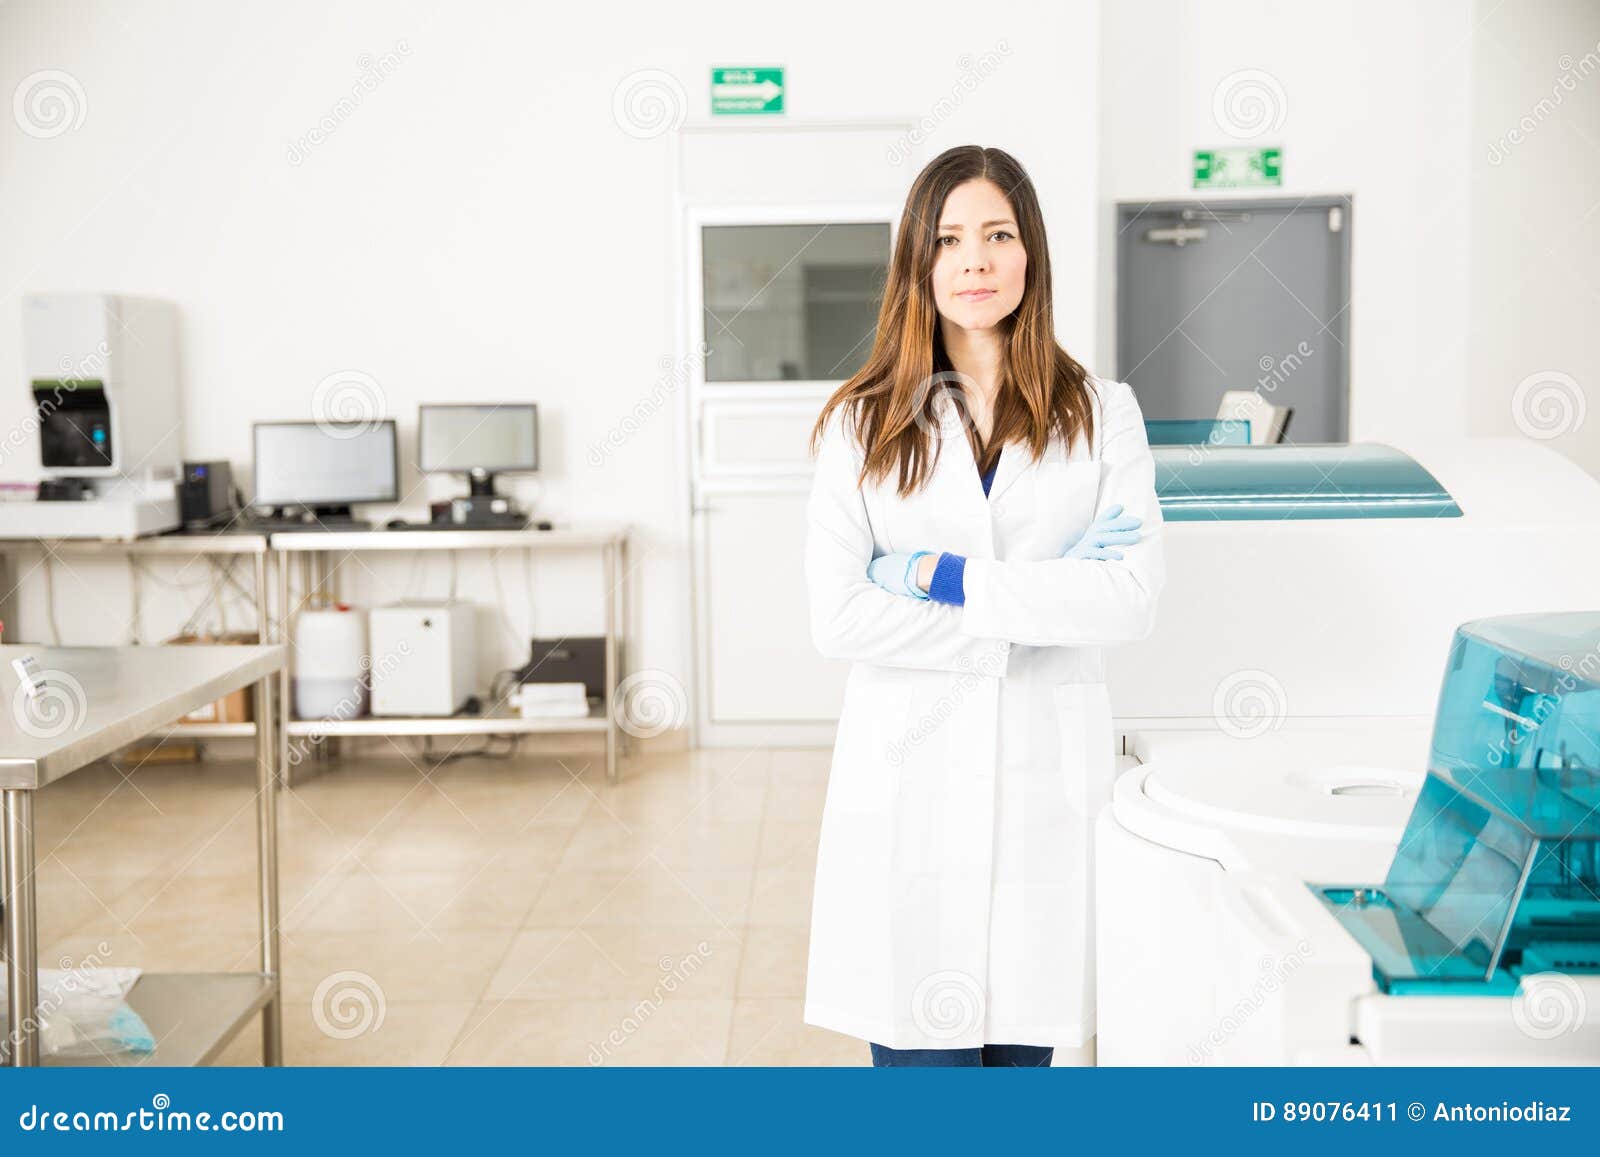 Beautiful Female Chemist in a Laboratory Stock Image - Image of ...